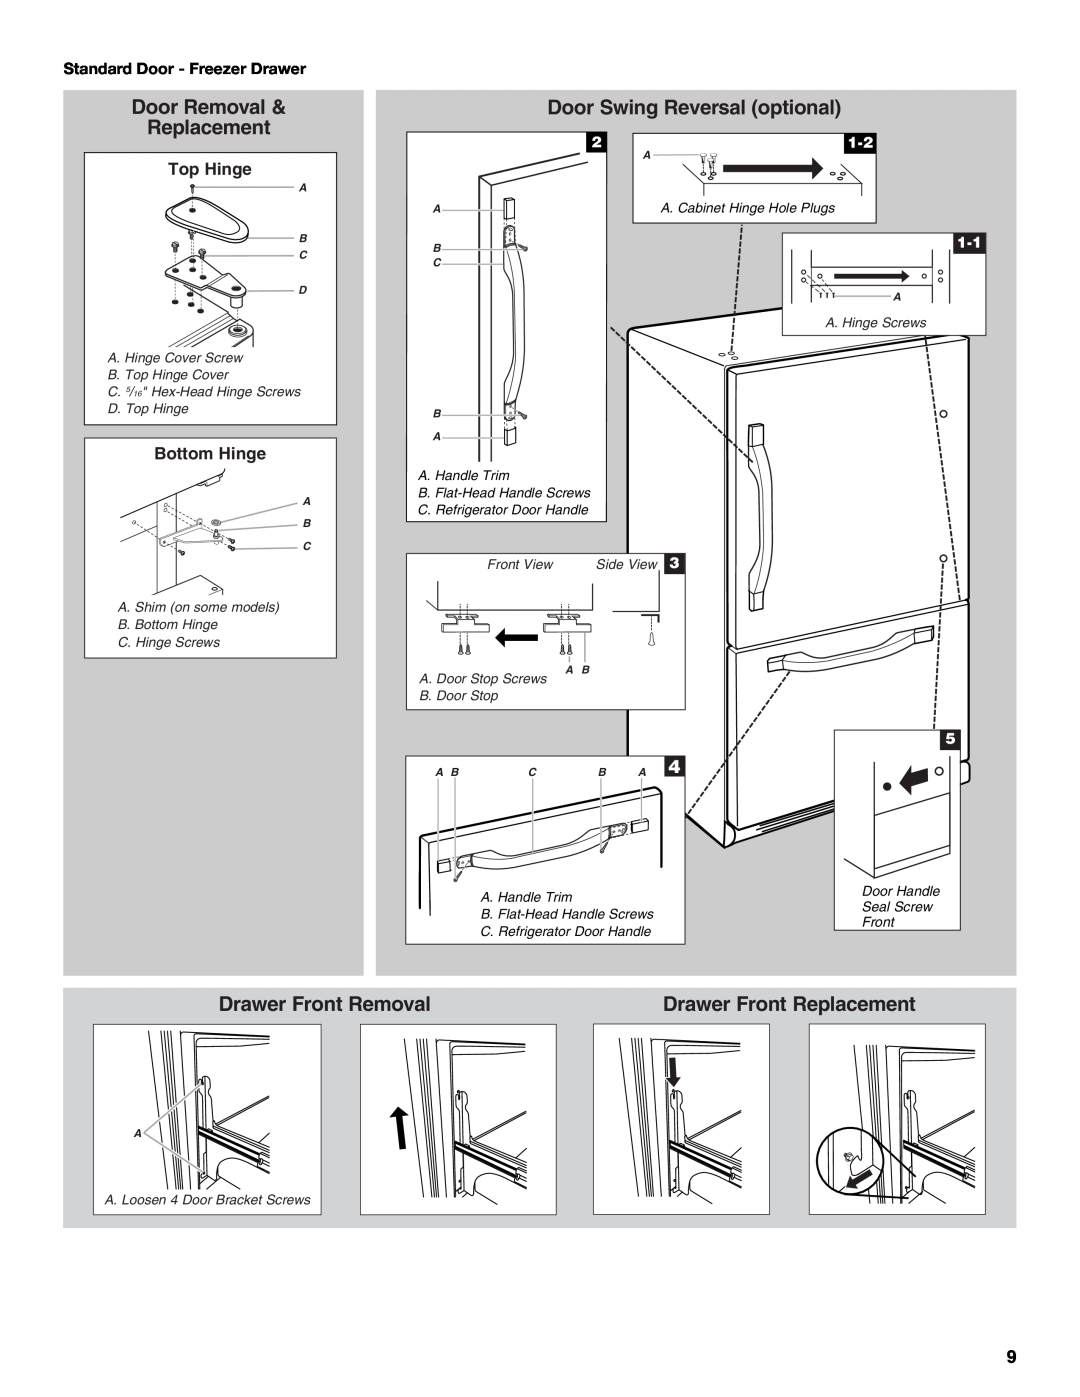 Whirlpool W10175448A Drawer Front Removal, Drawer Front Replacement, Door Removal & Replacement, Top Hinge, Bottom Hinge 